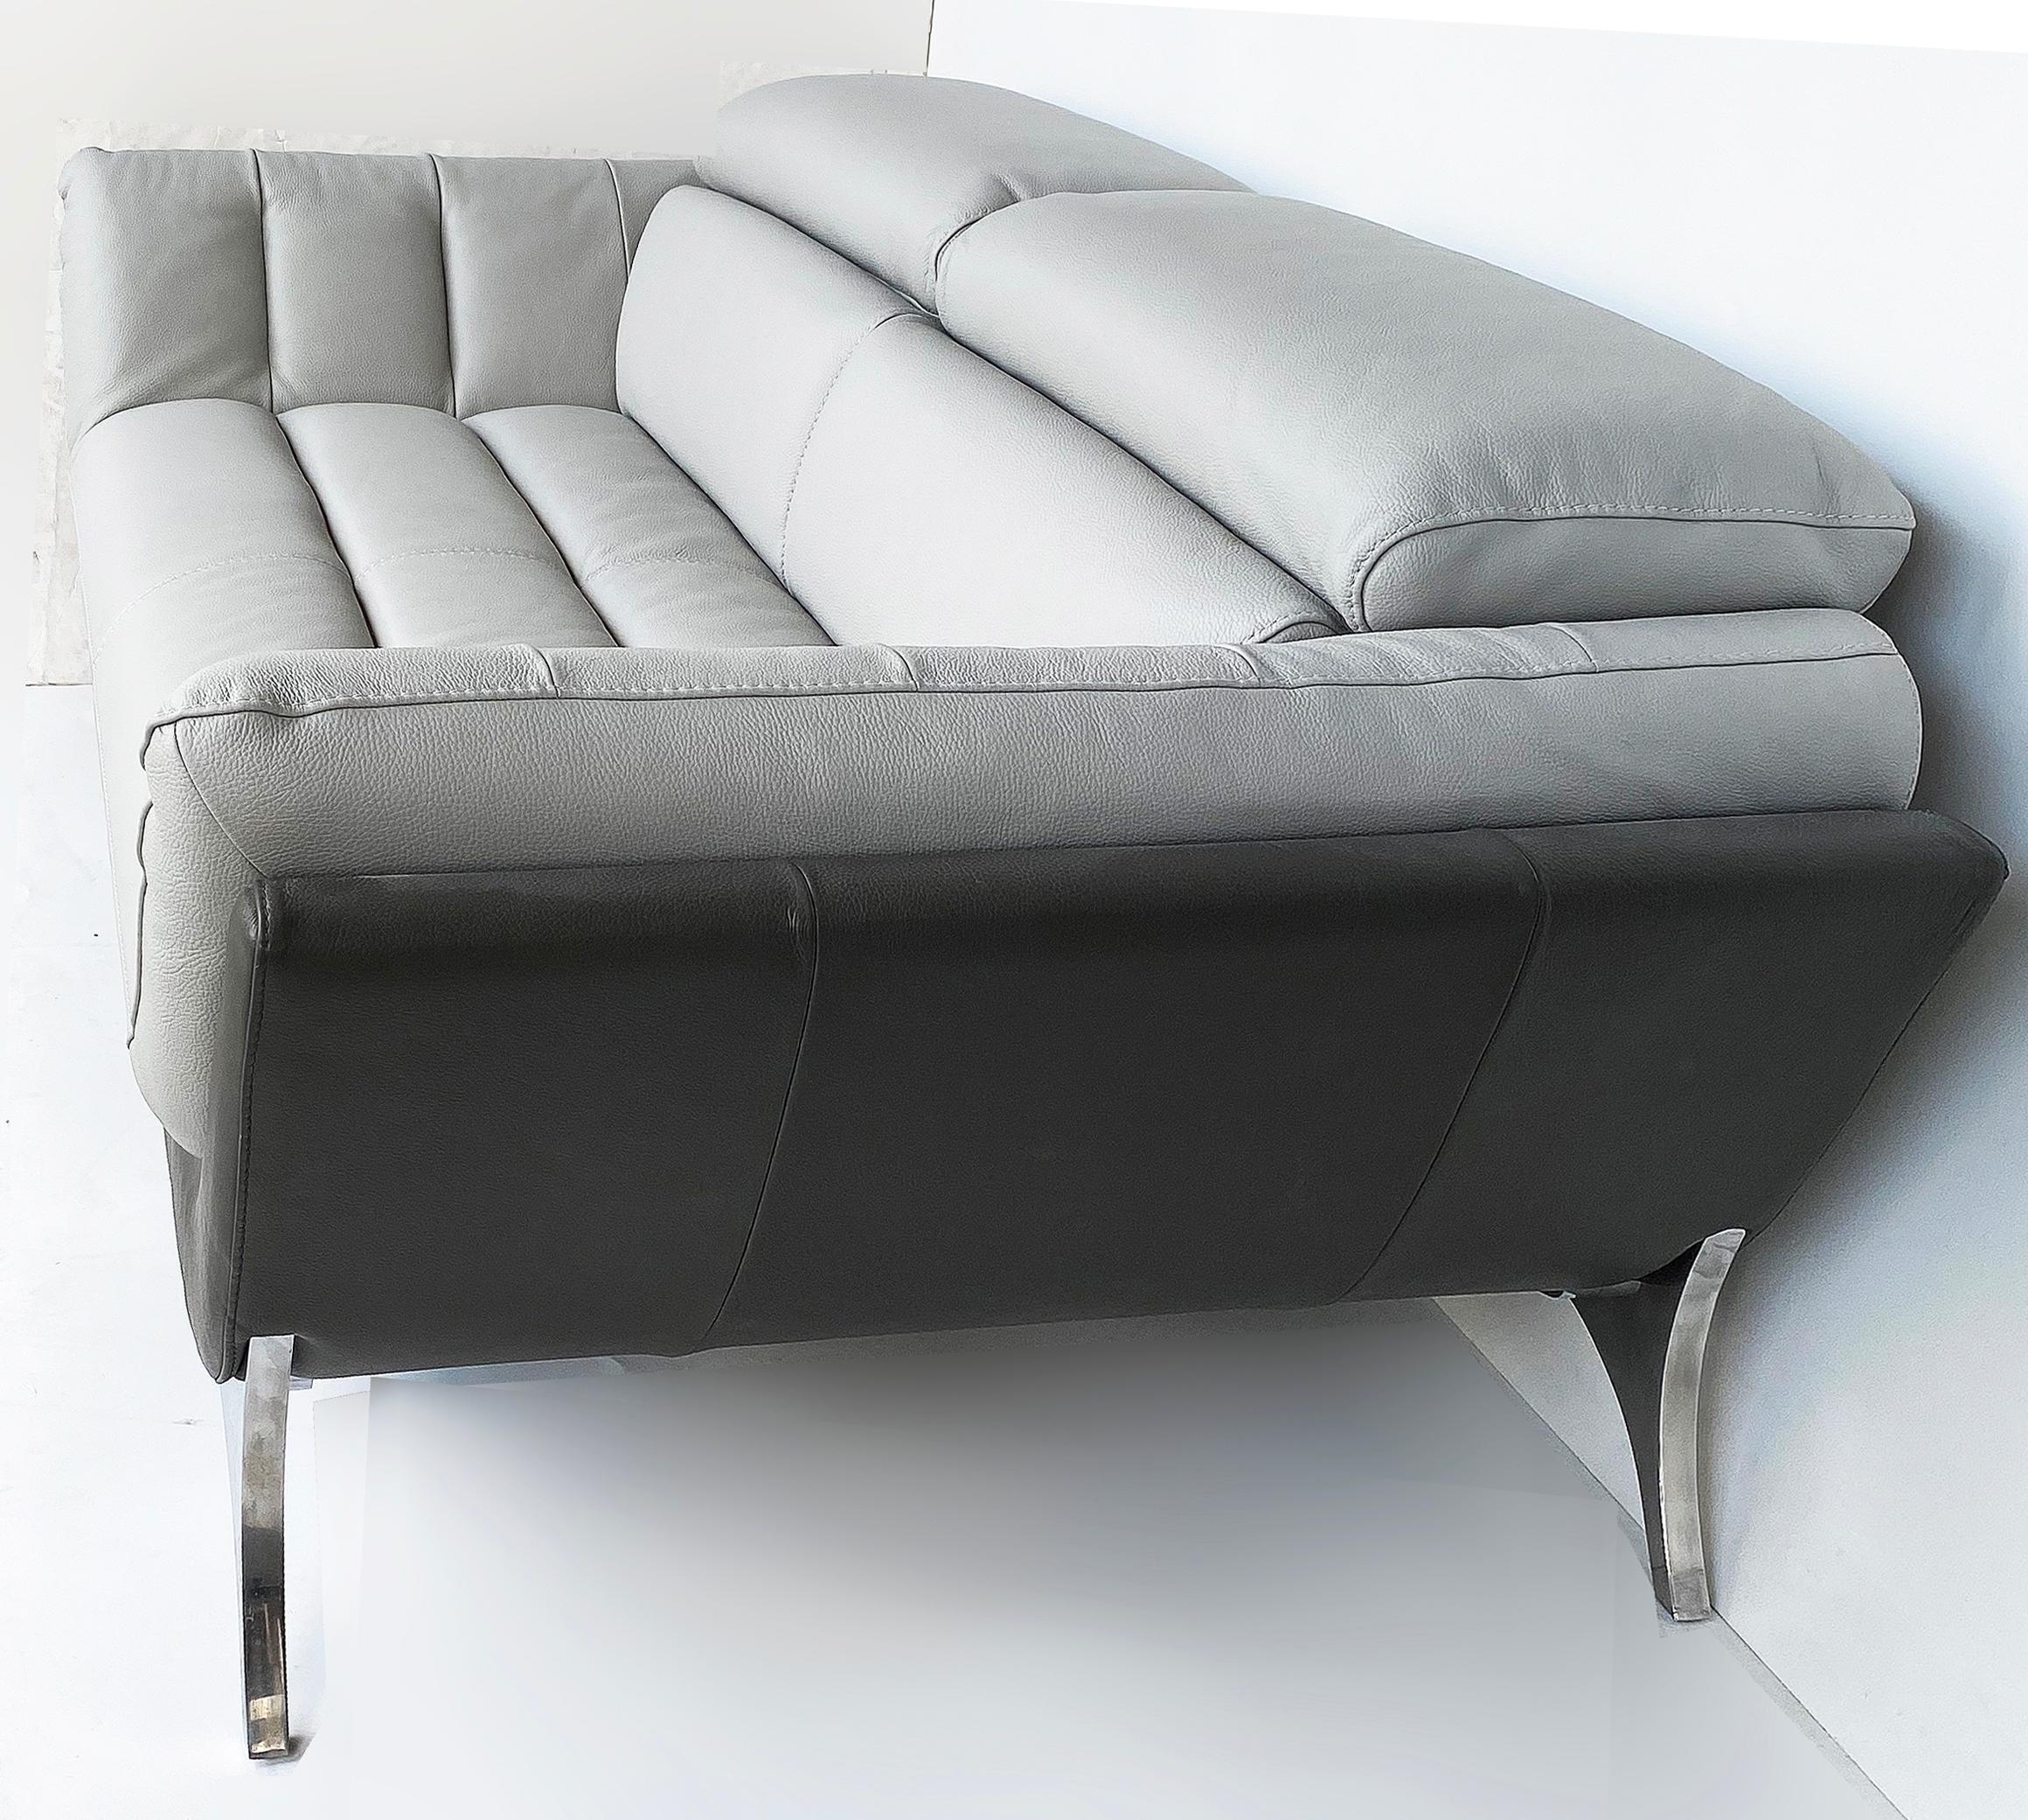 Egoitaliano leather sofa with adjustable headrests and stainless steel legs

Offered is a contemporary Egoitaliano leather sofa with adjustable headrests and stainless steel feet. The headrests are independently adjusted. The sofa is marked in two